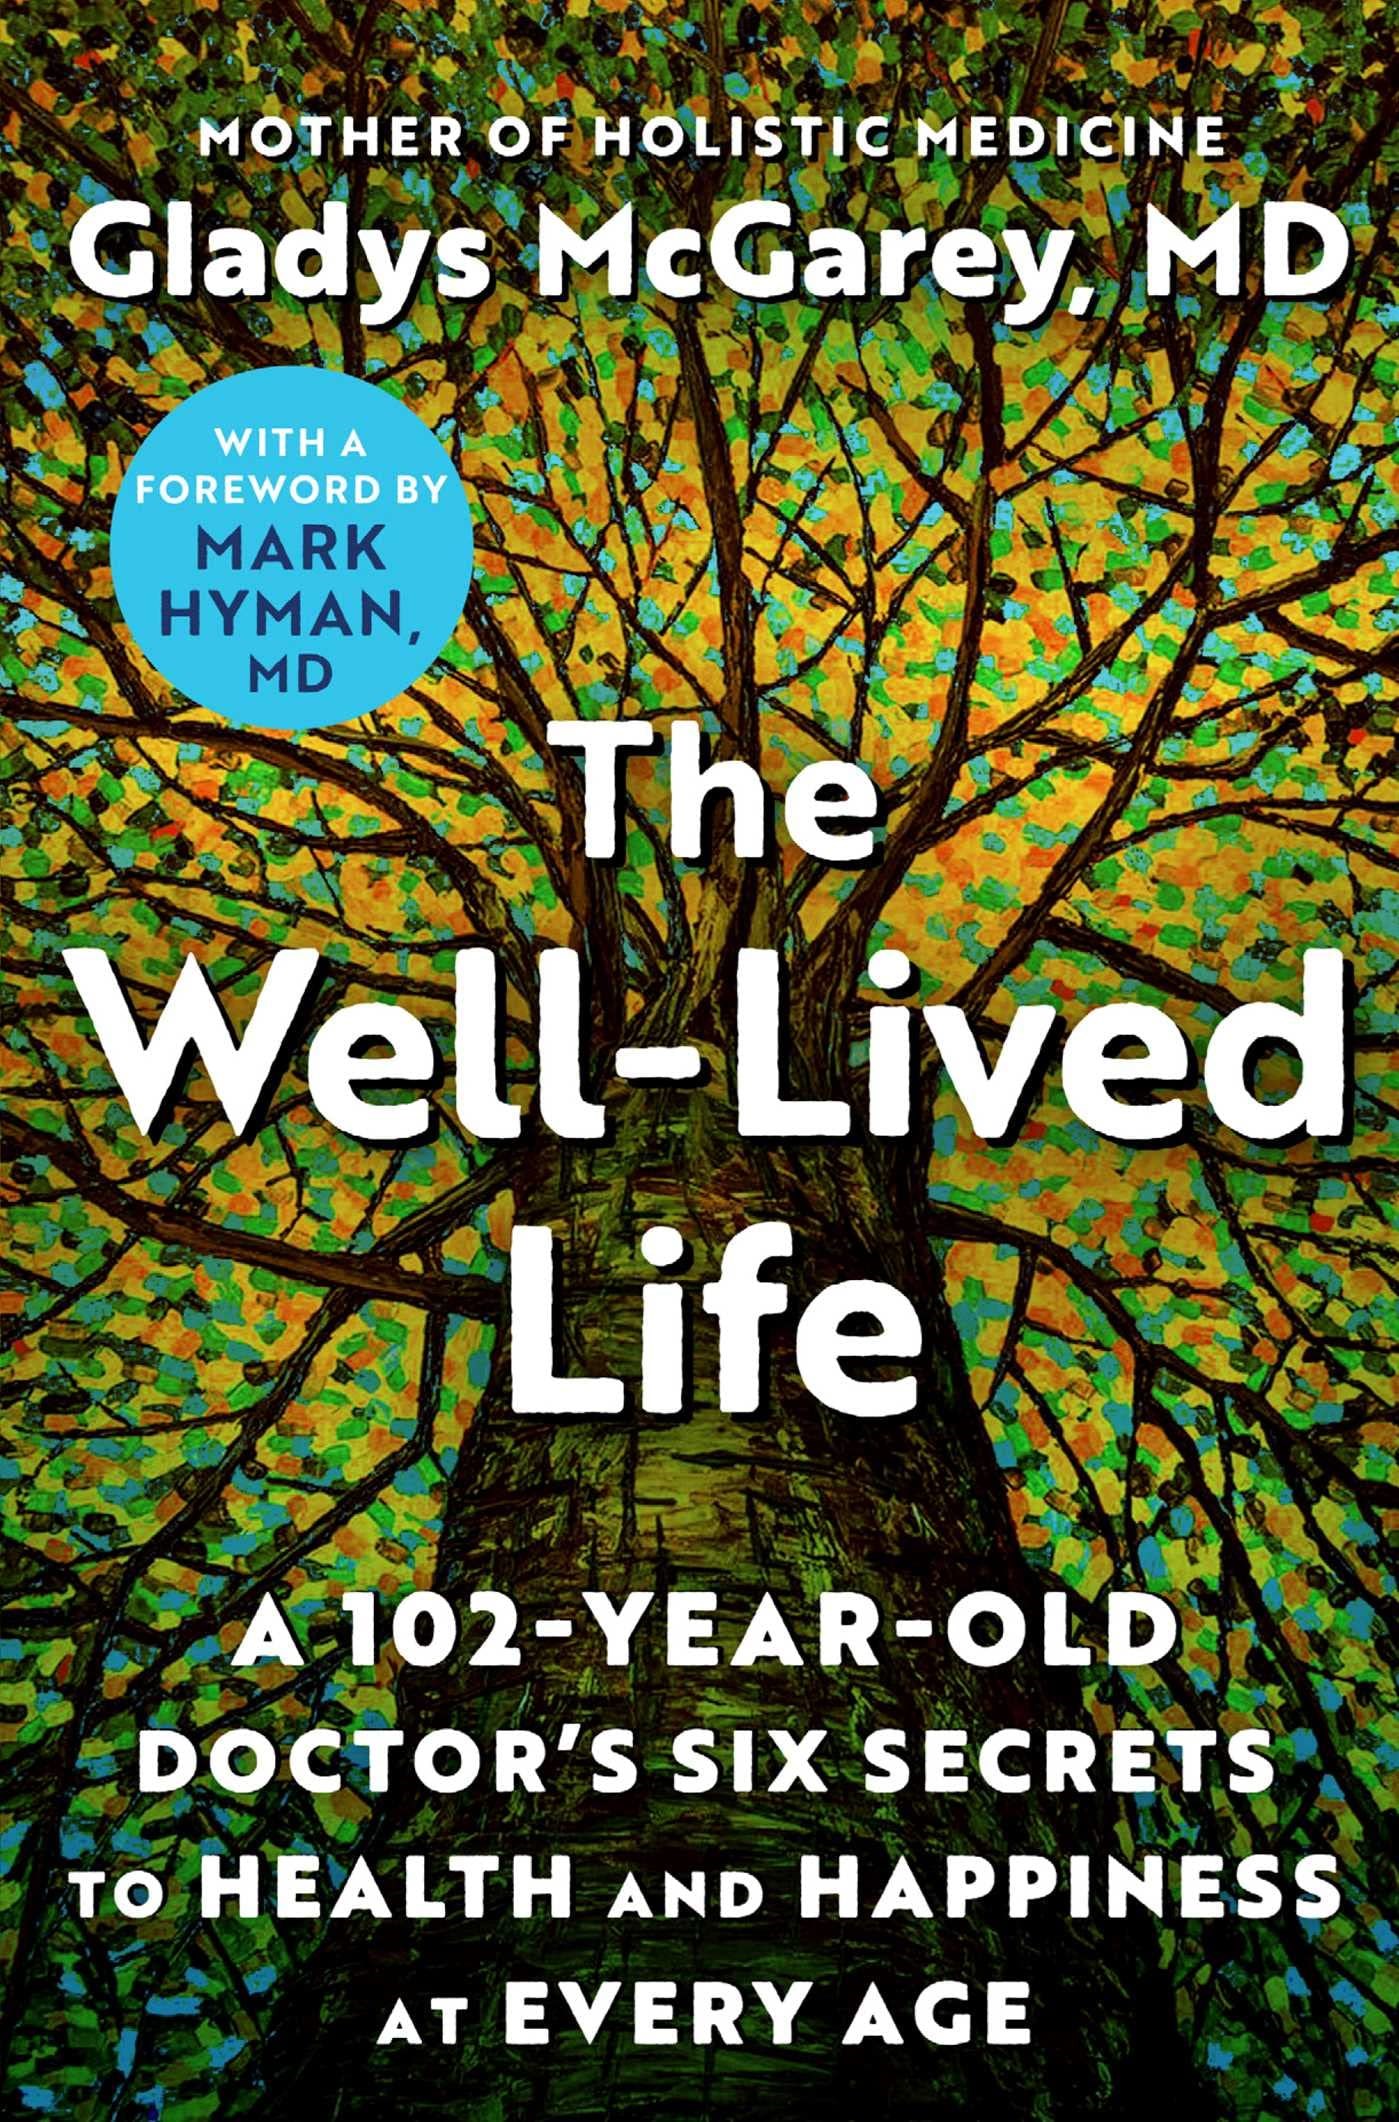 The Well-Lived Life: A 102-Year-Old Doctor's Six Secrets to Health and Happiness at Every Age by Gladys McGarey